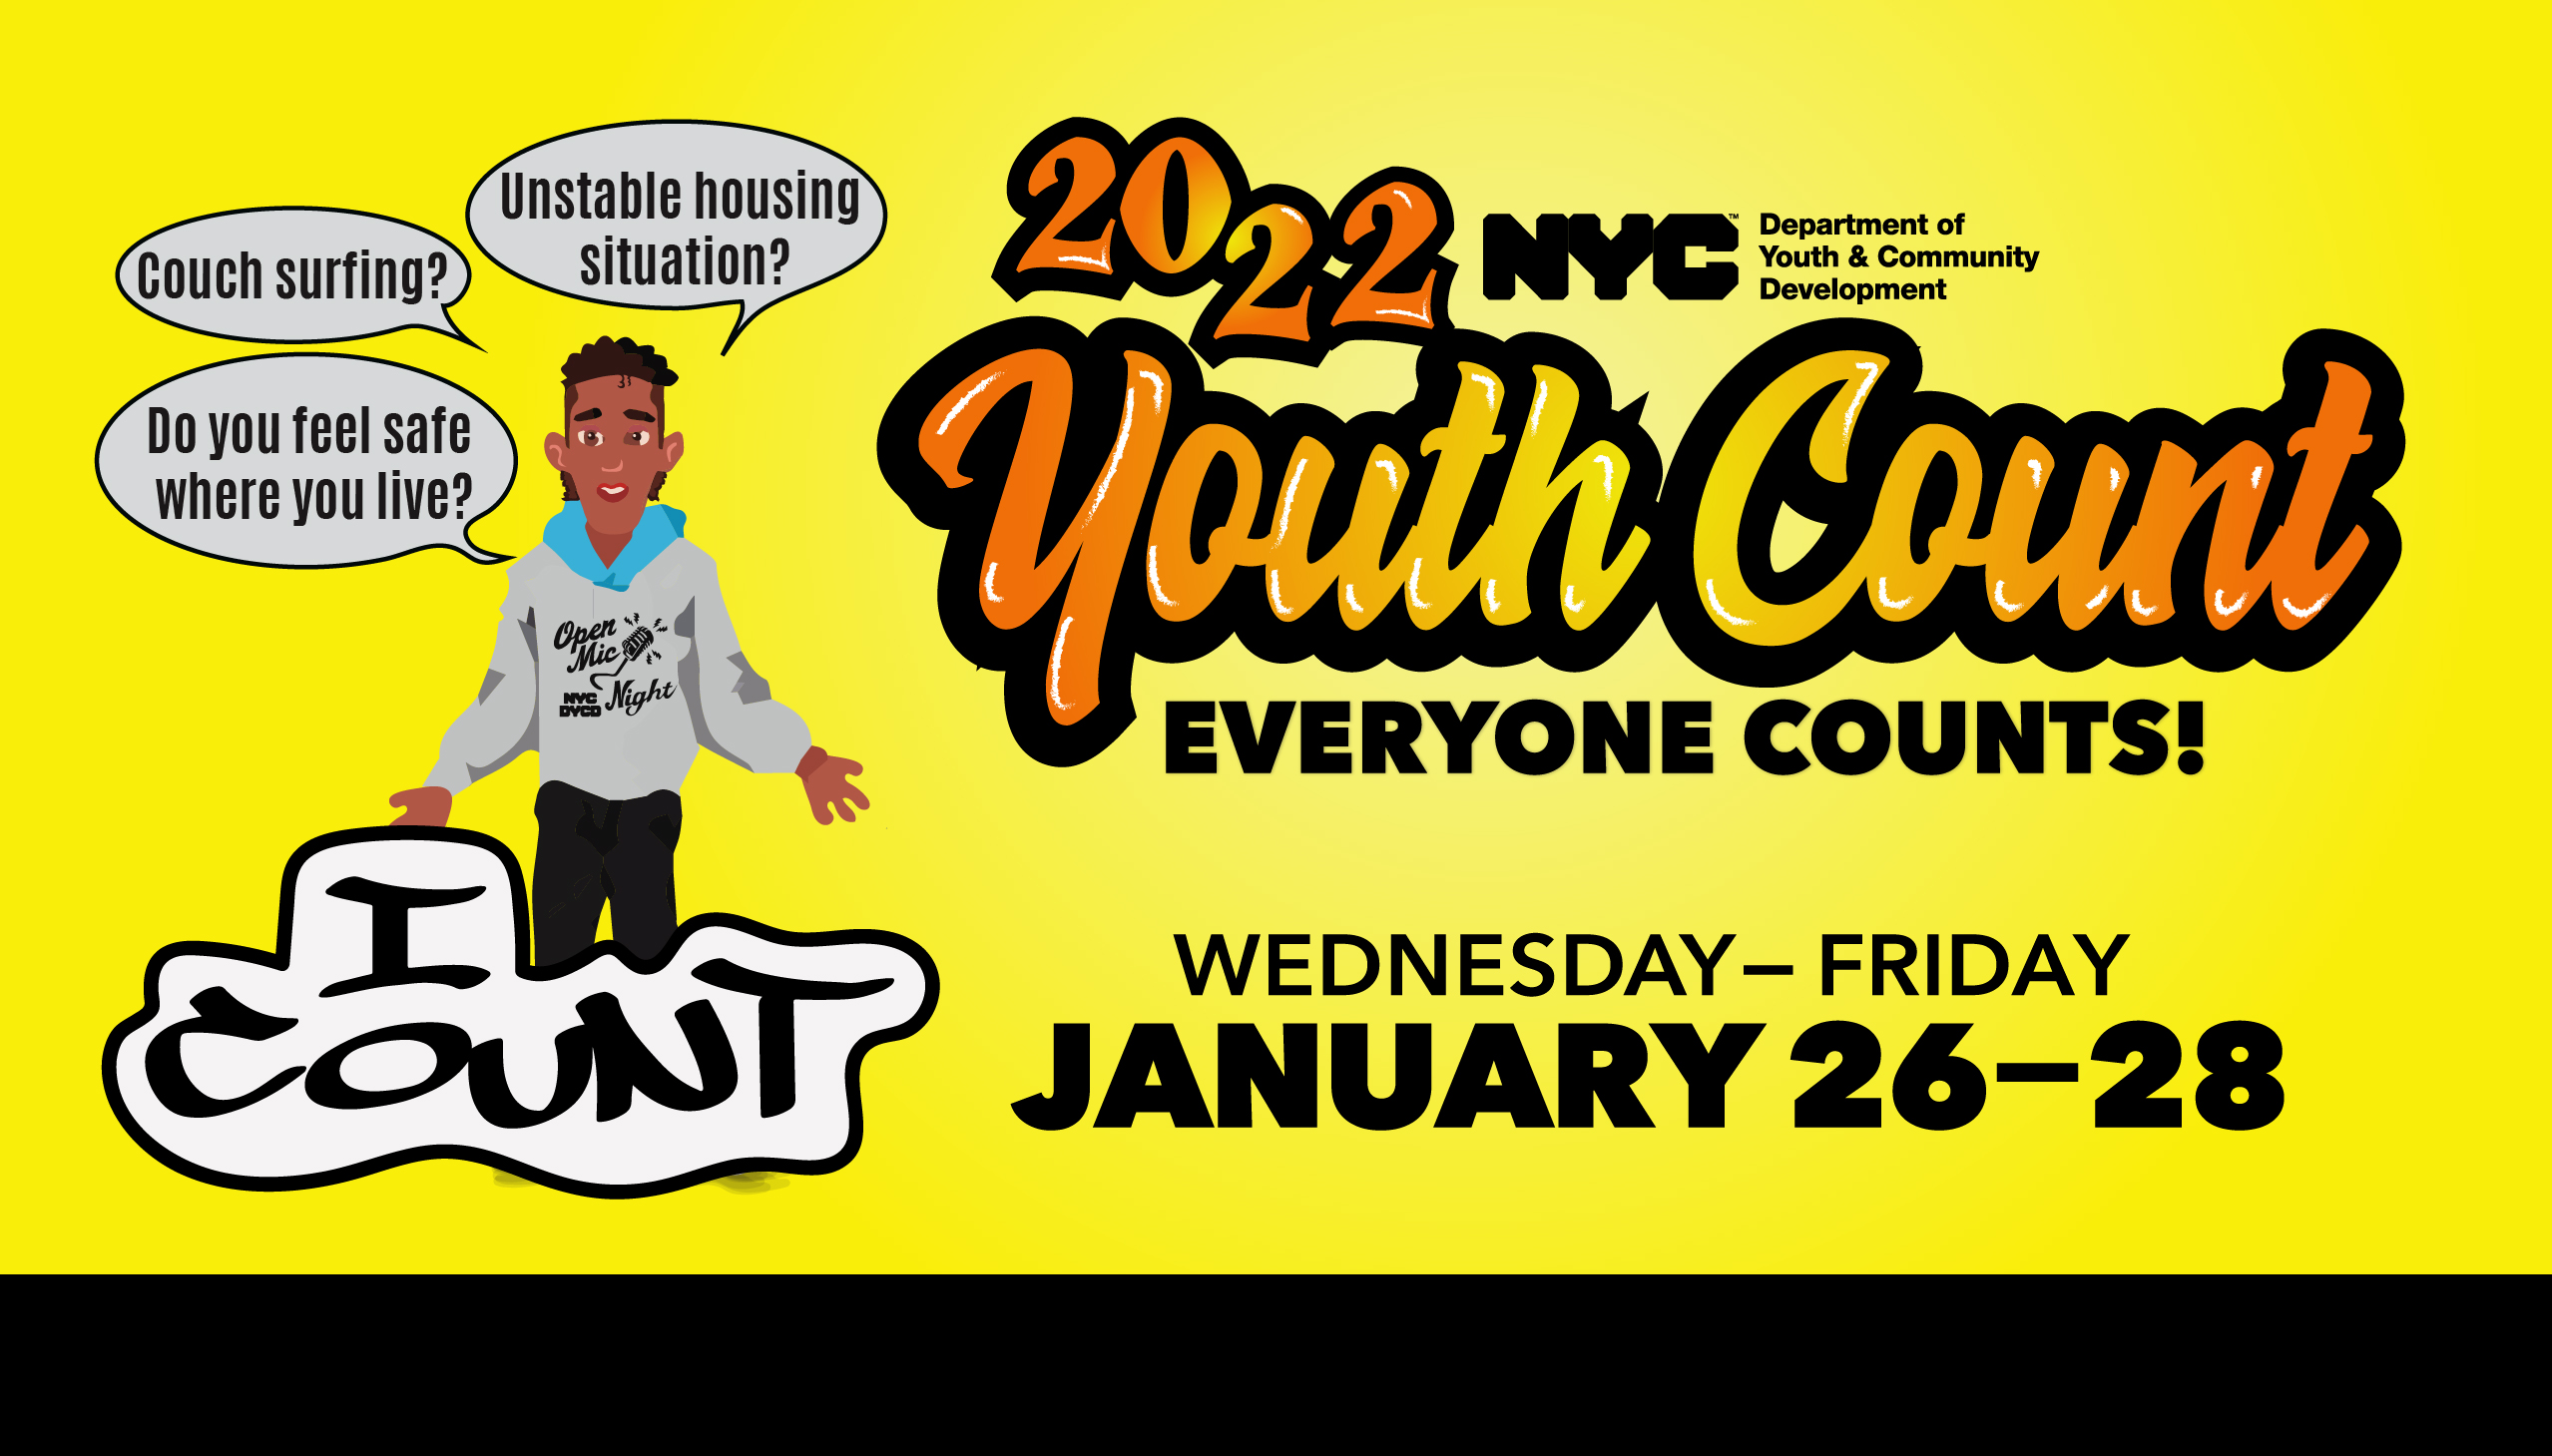 2022 Youth Count
                                           